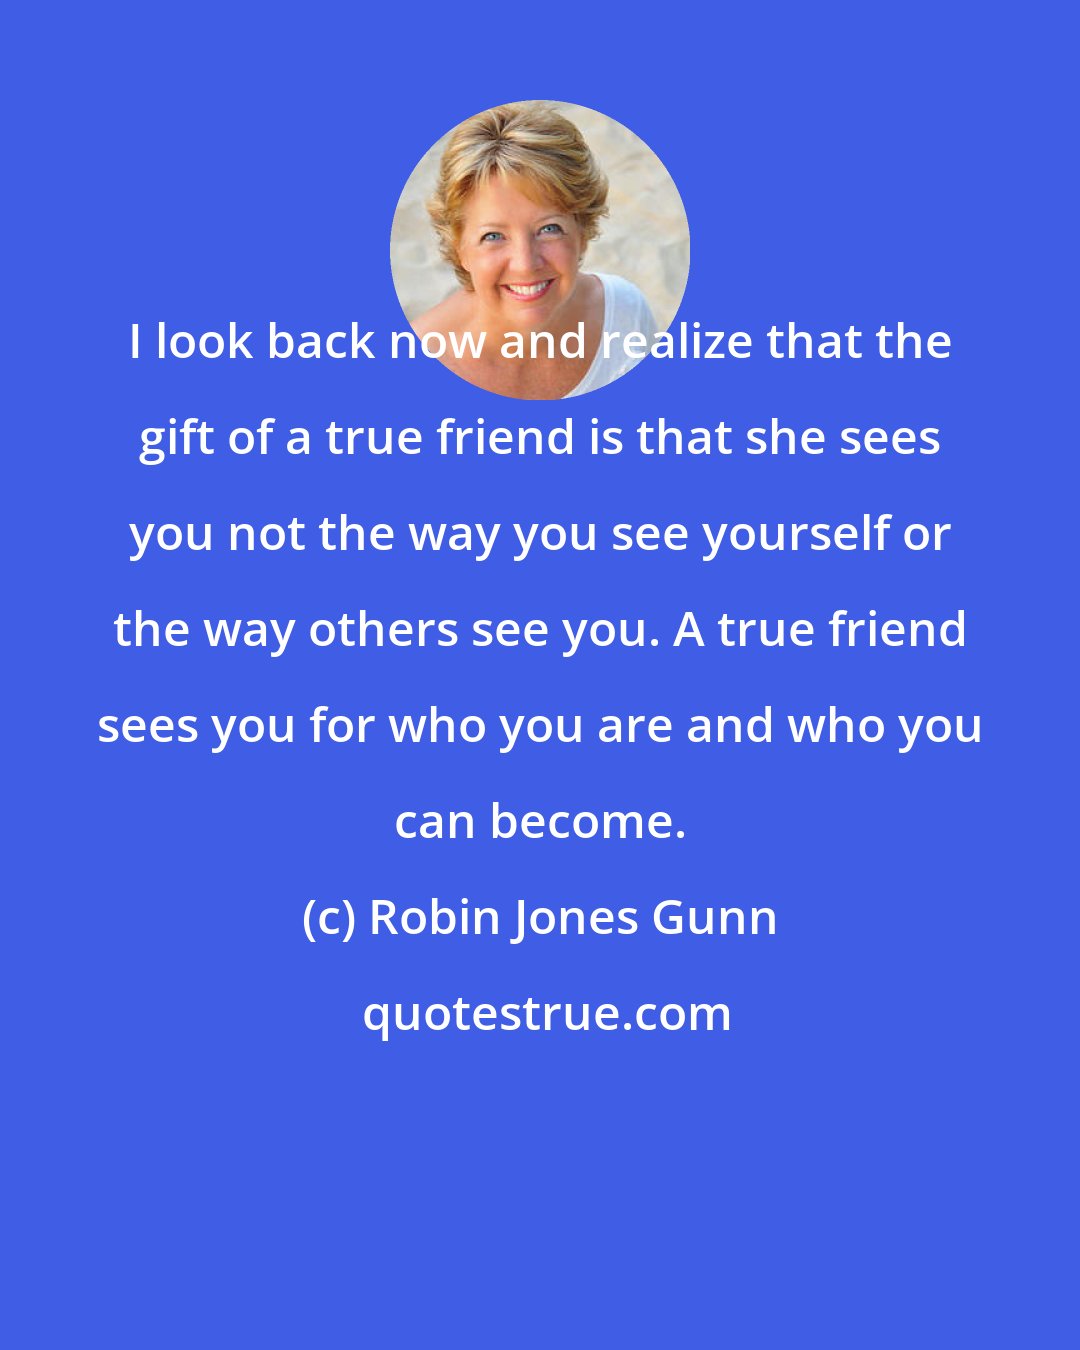 Robin Jones Gunn: I look back now and realize that the gift of a true friend is that she sees you not the way you see yourself or the way others see you. A true friend sees you for who you are and who you can become.